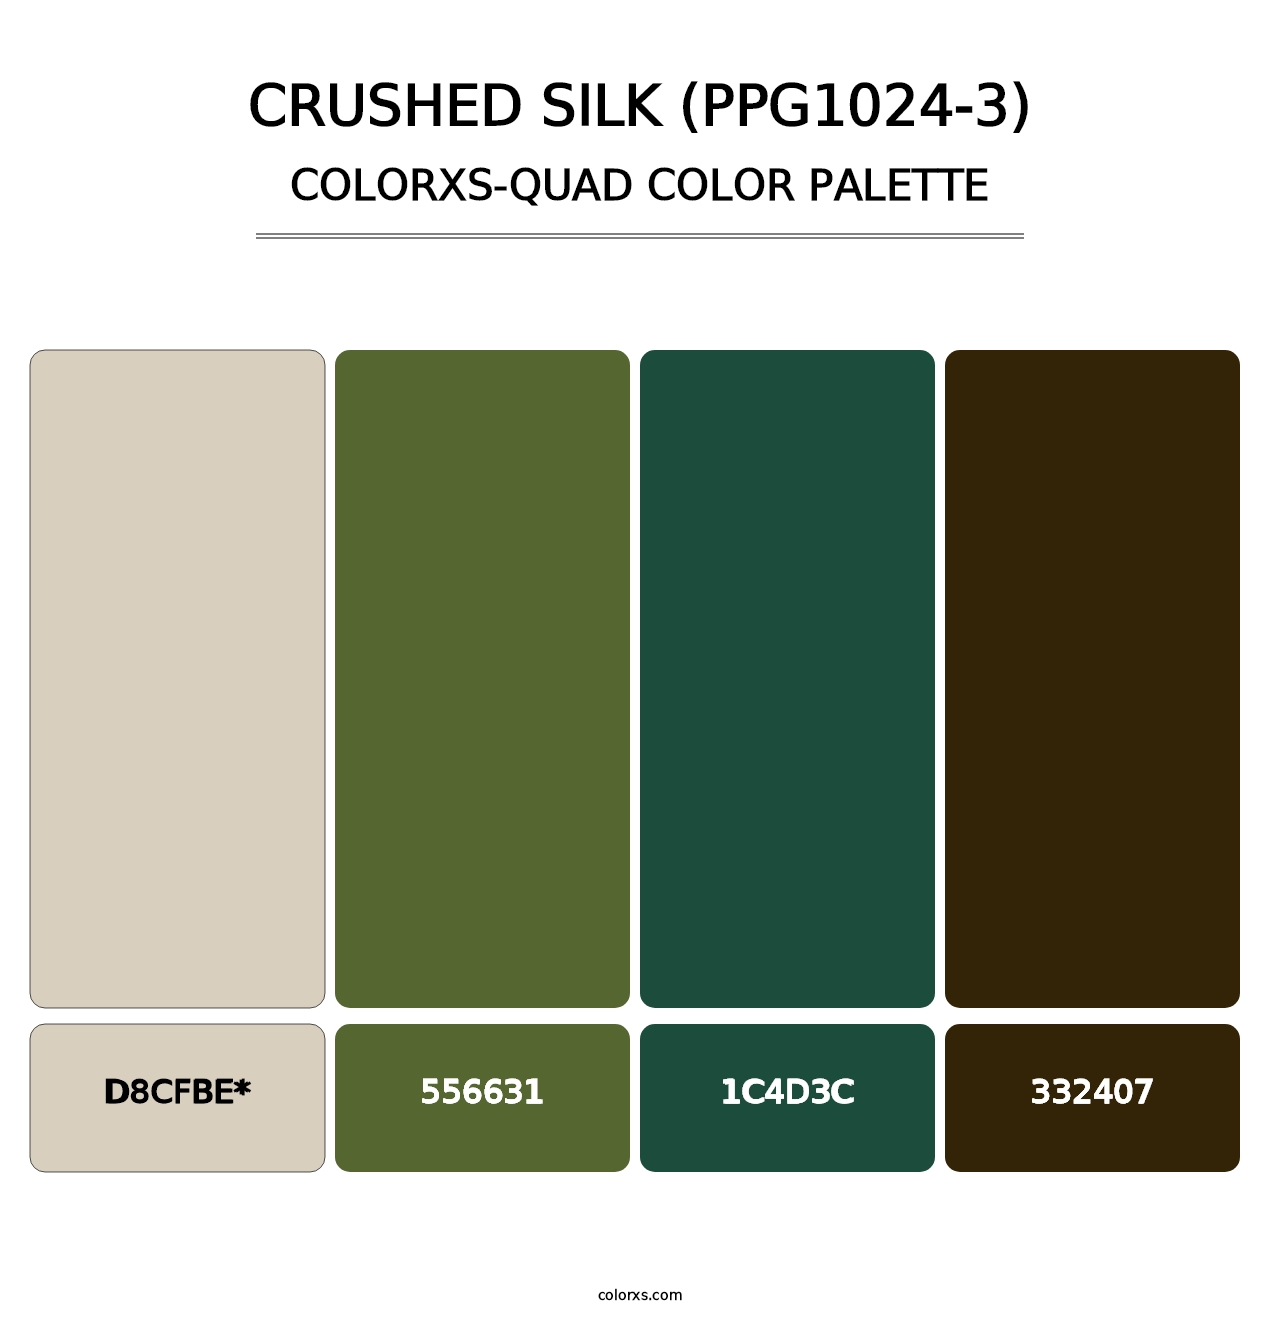 Crushed Silk (PPG1024-3) - Colorxs Quad Palette